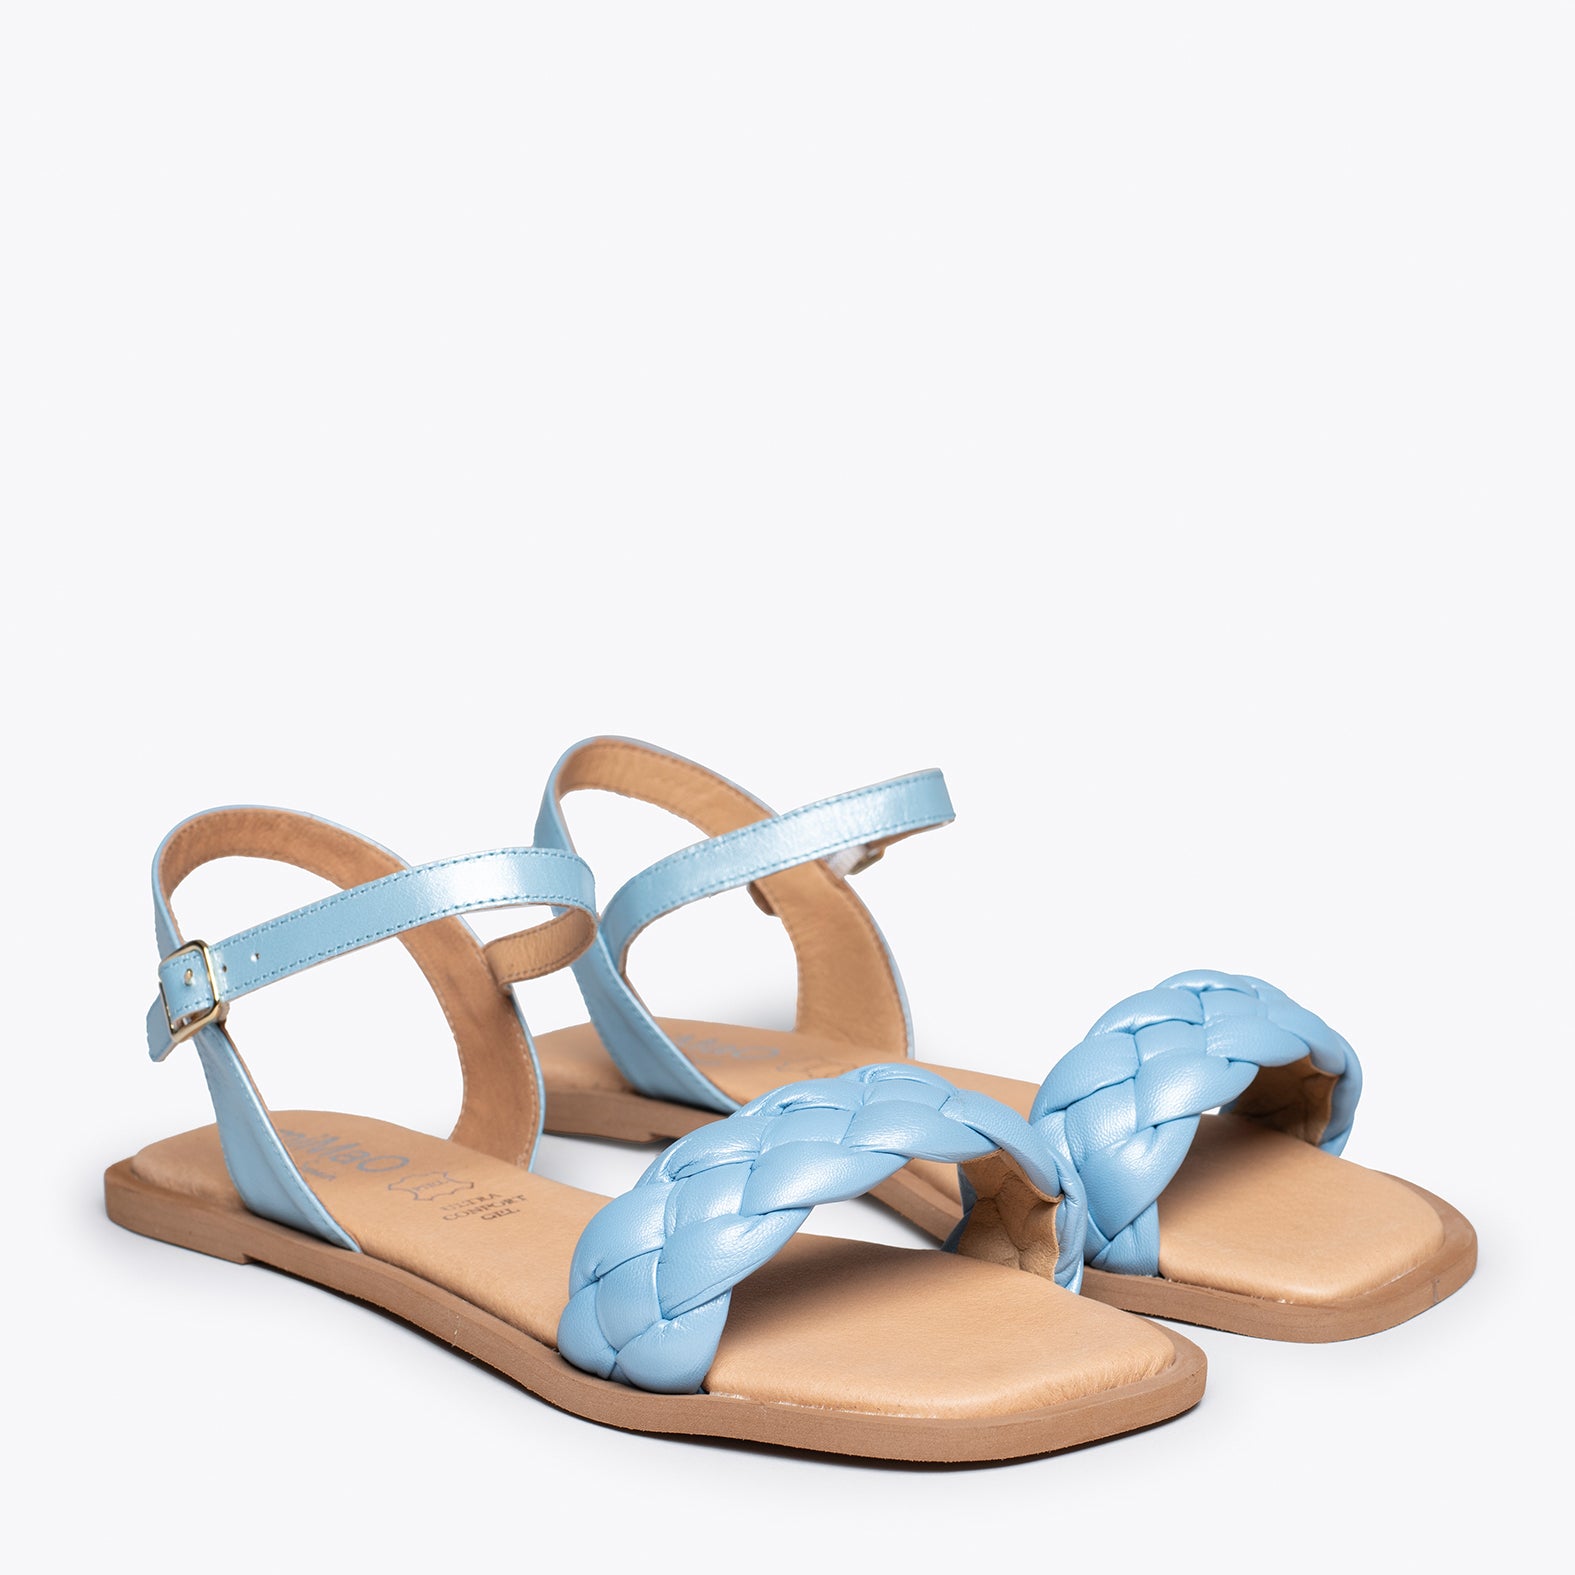 MARBELLA – BLUE flat sandals with braided strap